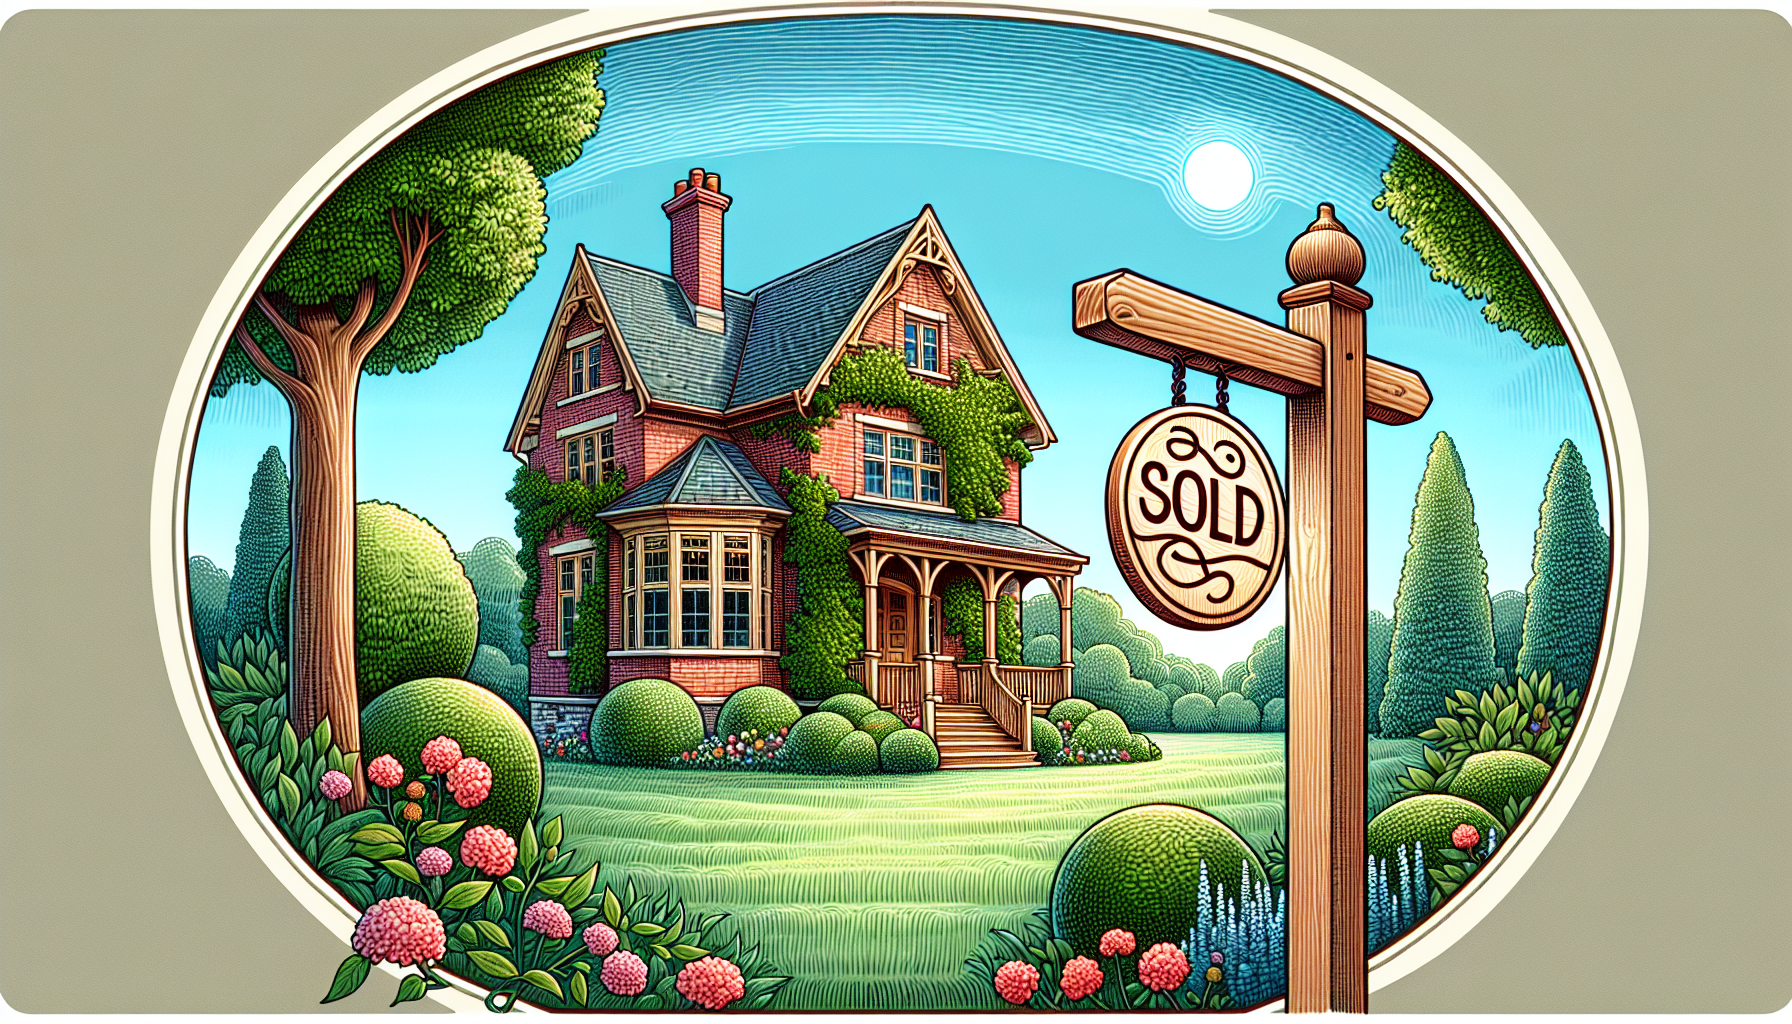 Illustration of a house with a 'sold' sign in front of it